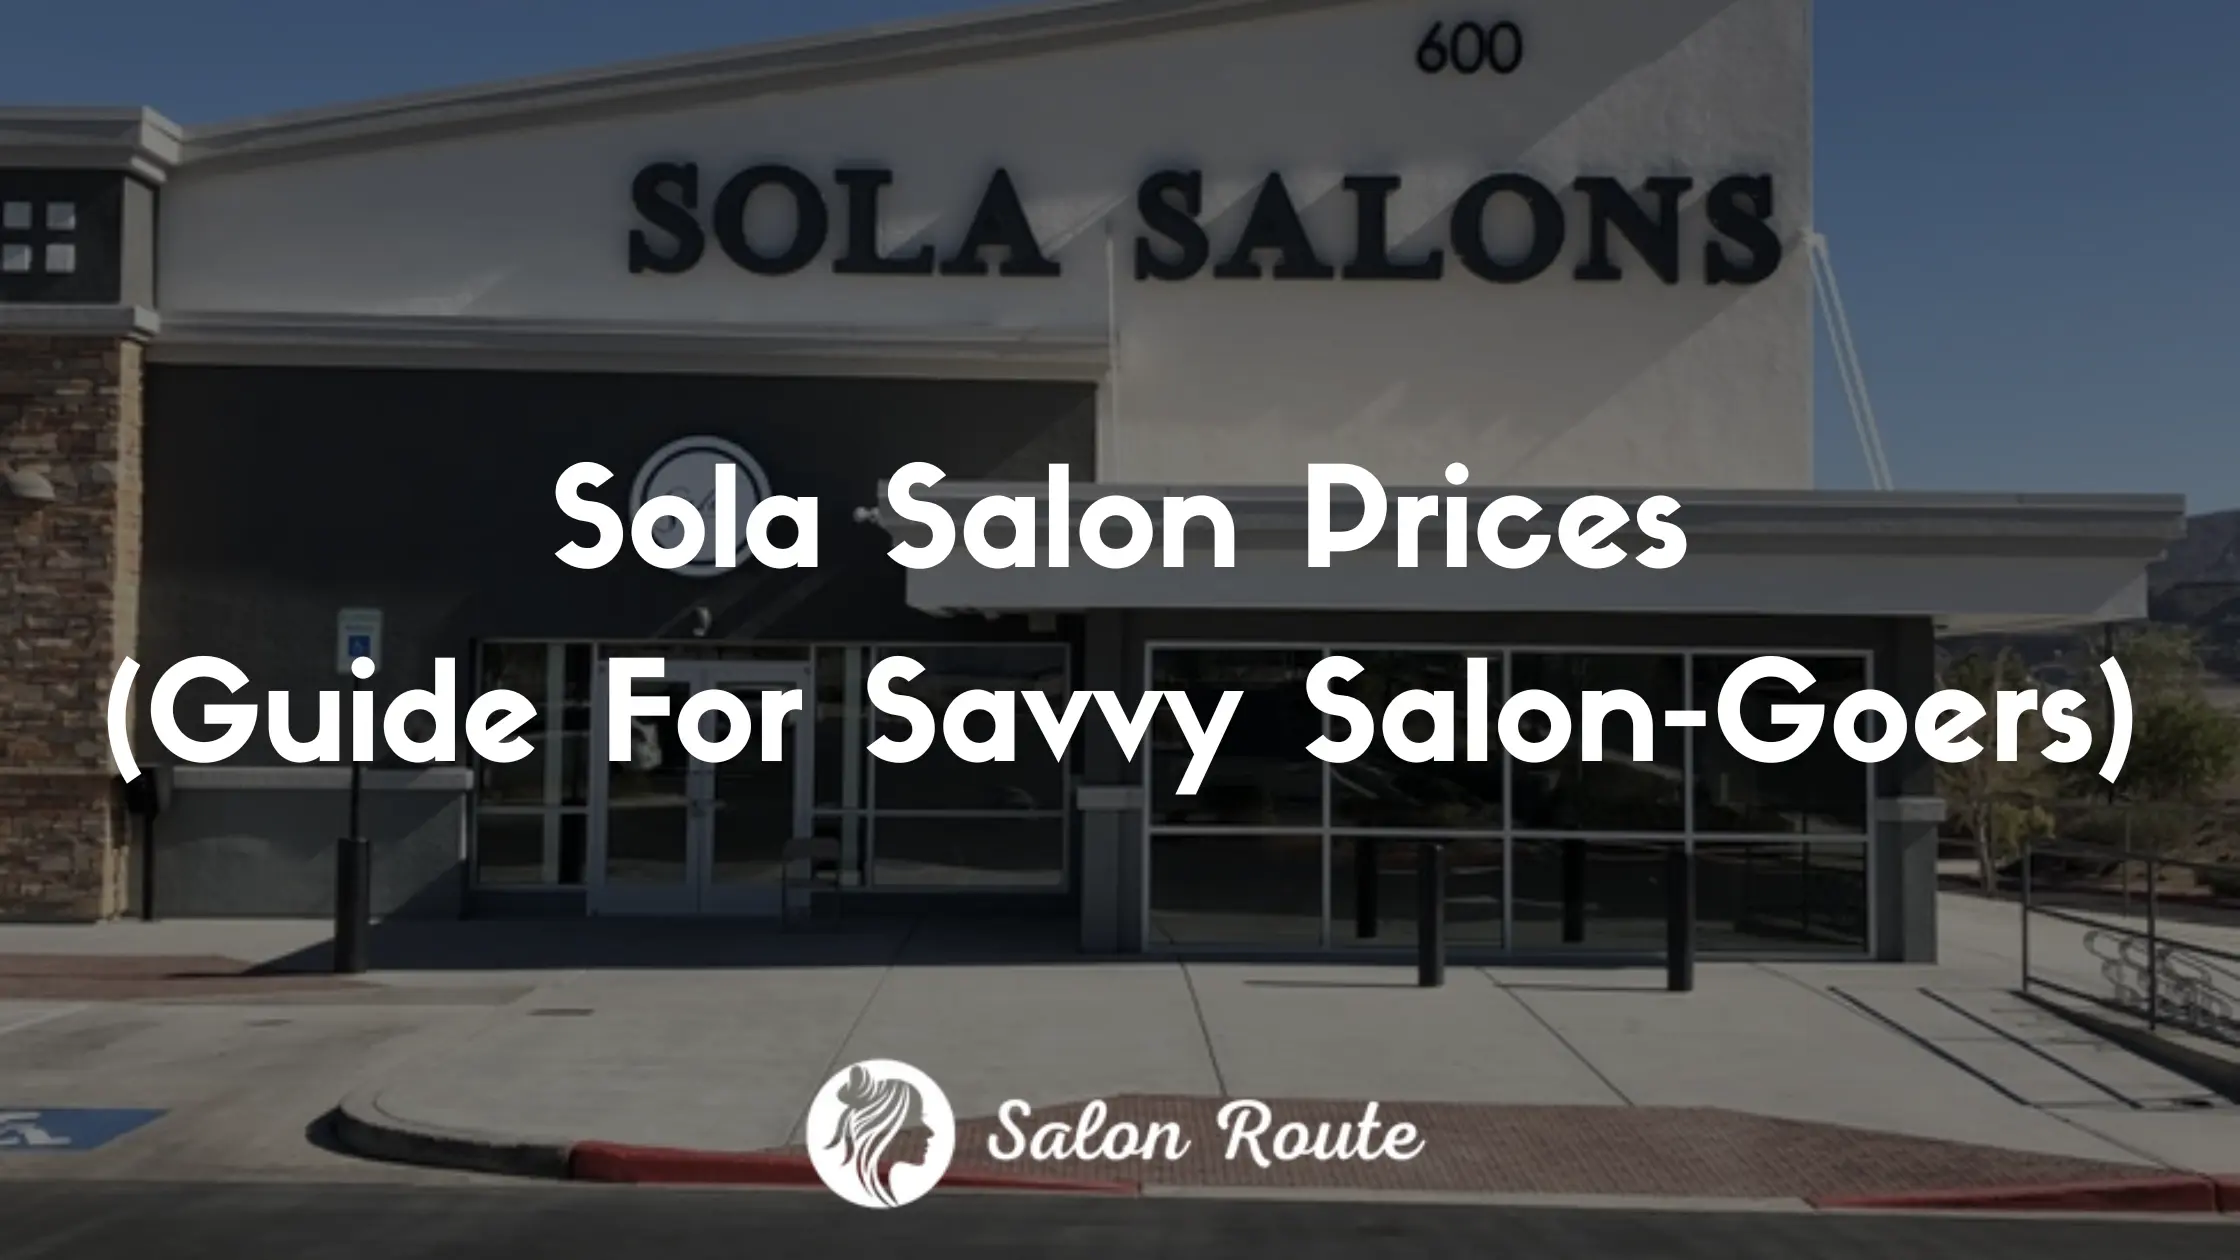 Sola Salon Prices (Guide For Savvy Salon-Goers)